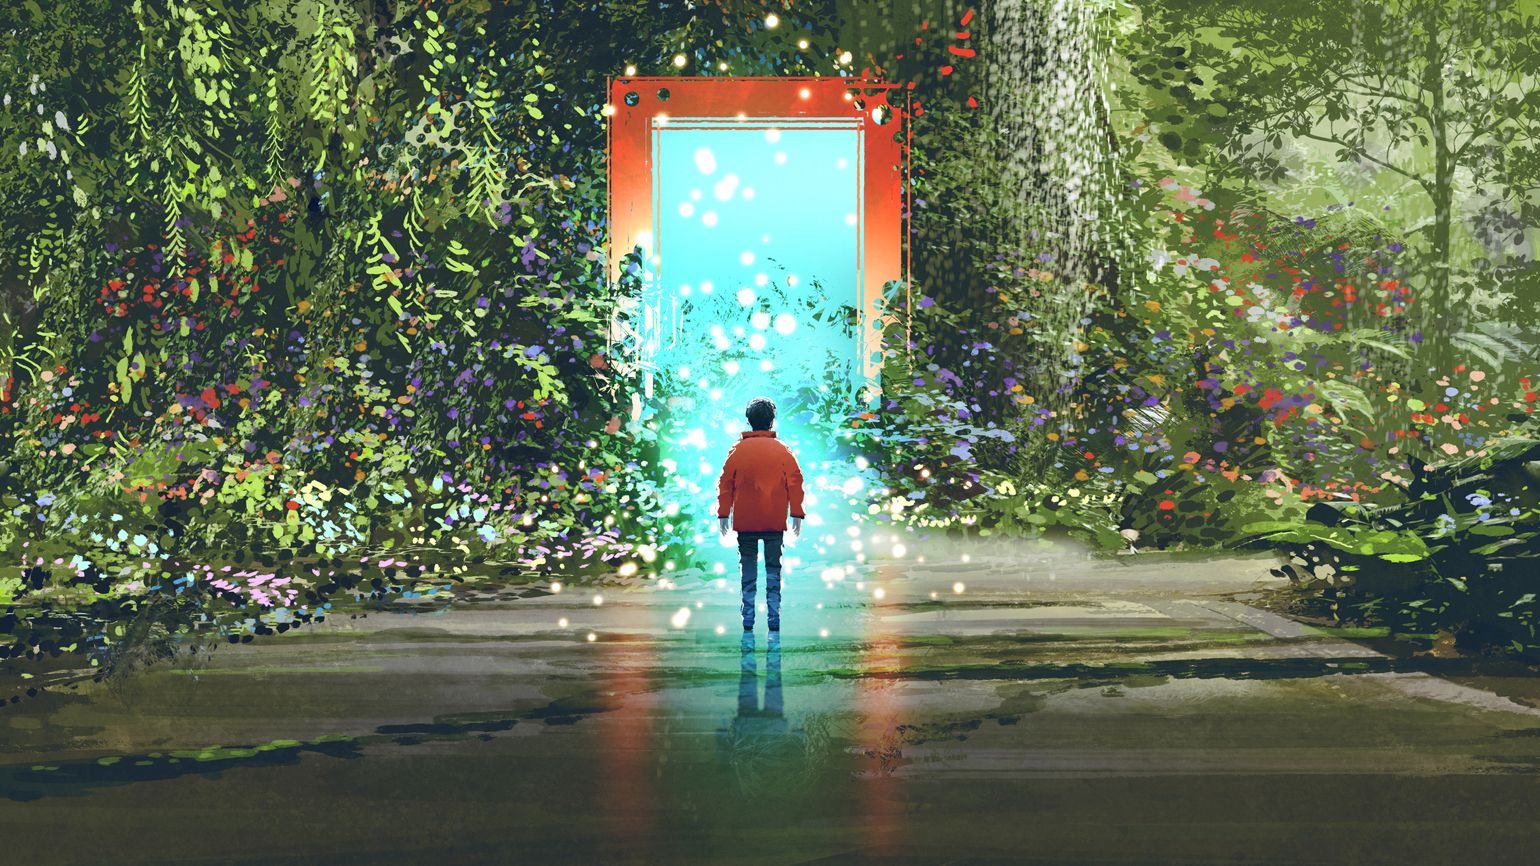 Boy standing in front of a magic gate.